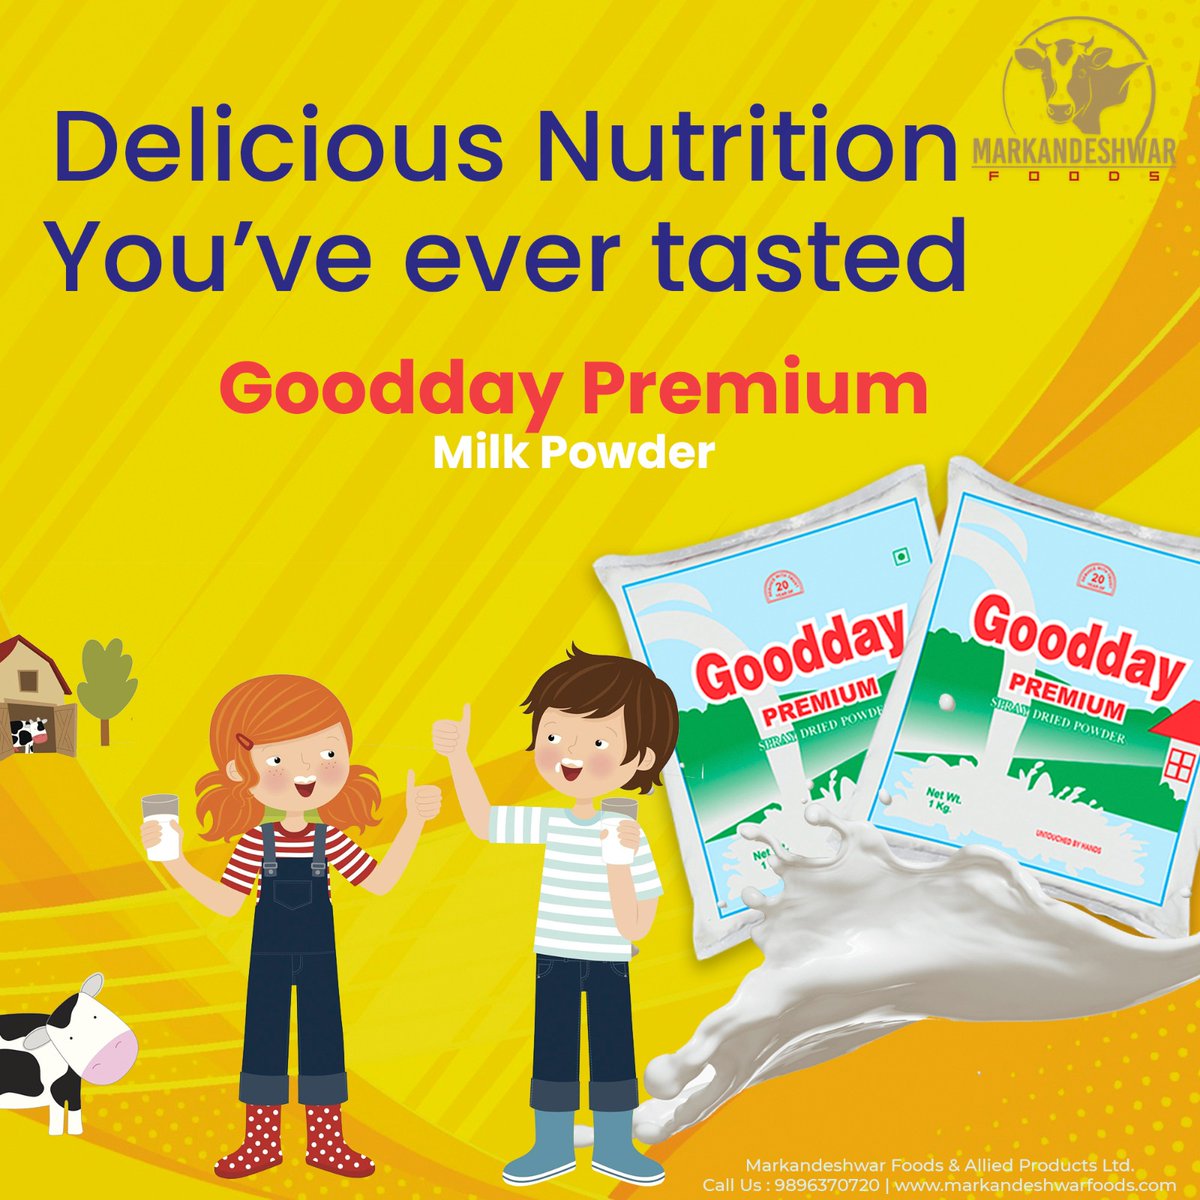 G O O D D A Y .  M I L K .  P O W D E R . 
Delicious nutrition you have ever tasted. 

#GooddayPremiumMilk

Markandeshwar Foods & Allied Products Ltd.
For trade inquiry 9896370720, 9729344011, 9810754400.
.
.
.
#markandeshwarfoods #milk #dairy #dairyproducts #goodday #Healthy